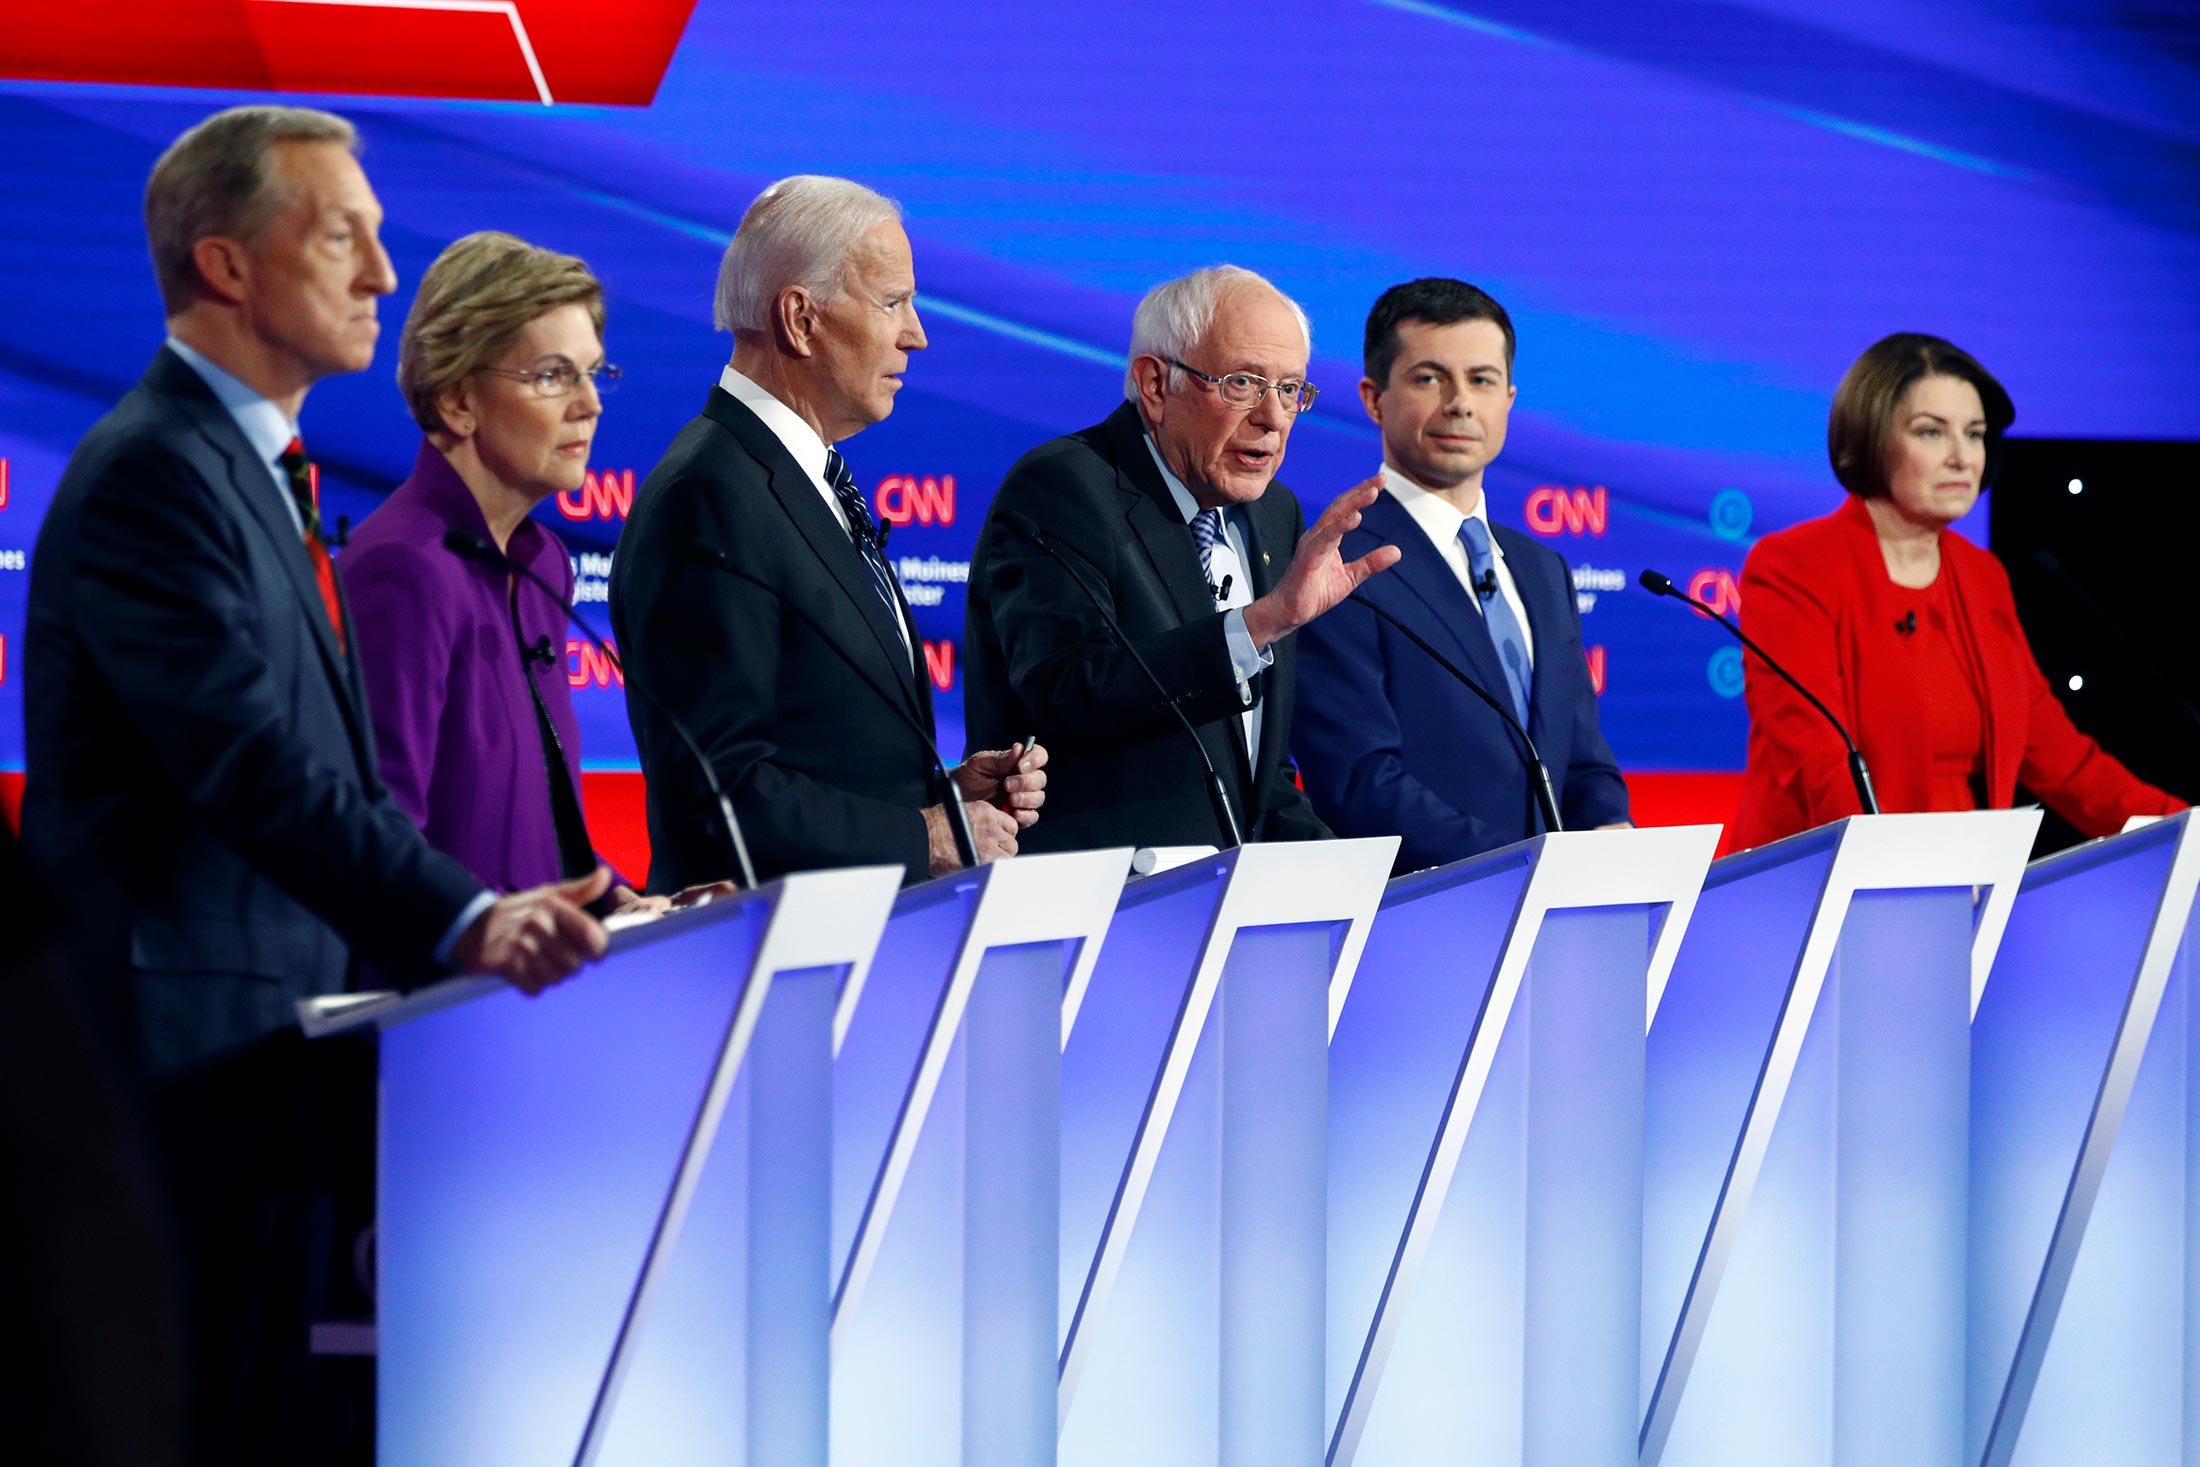 Climate Policy of 2020 Presidential Candidates Ranked The Brink